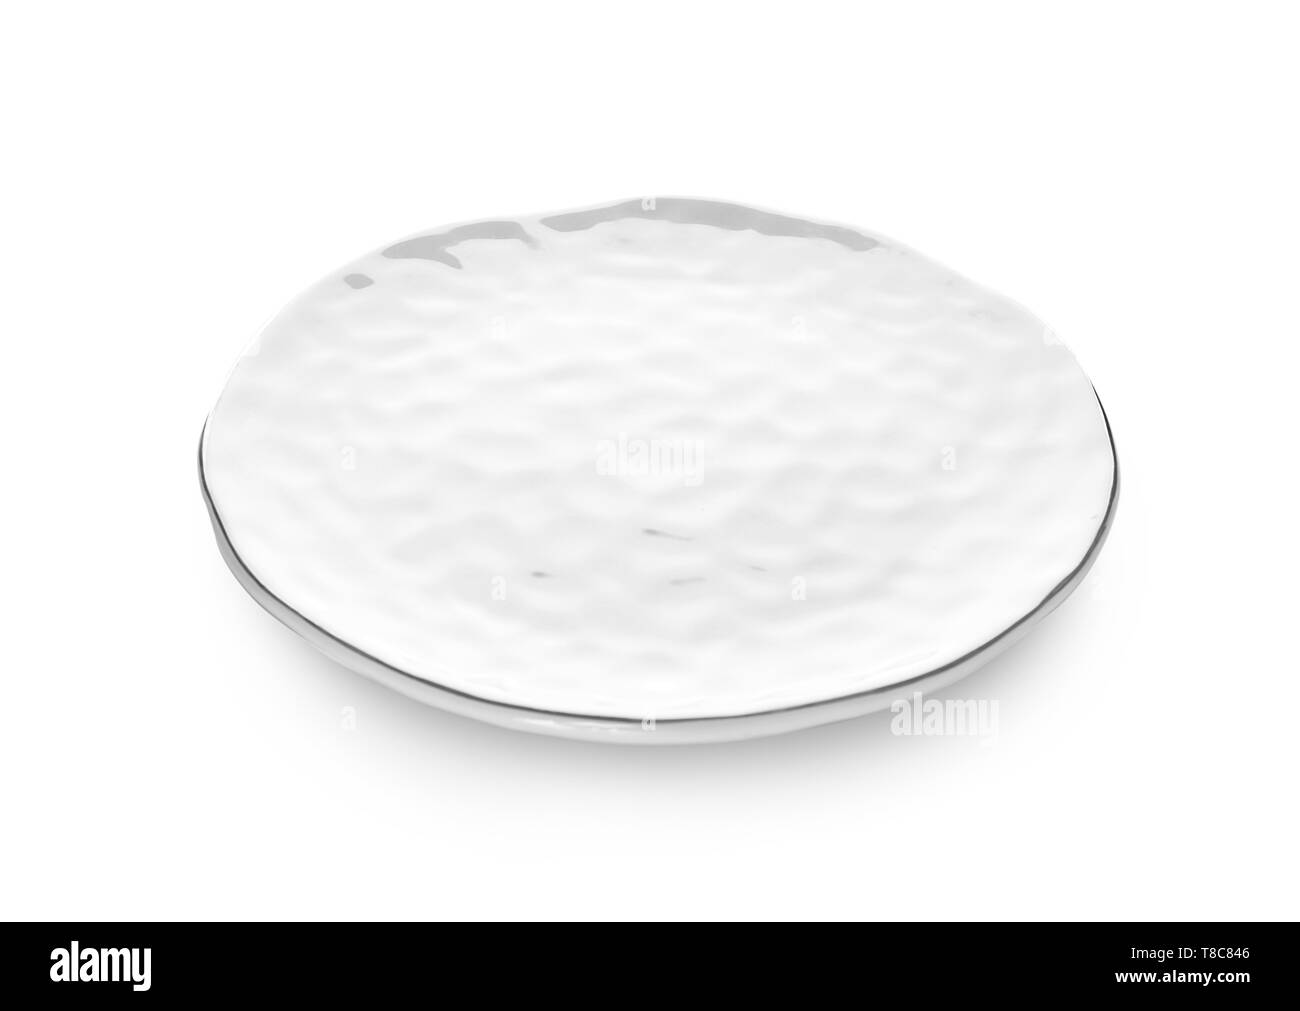 Clean plate on white background Stock Photo